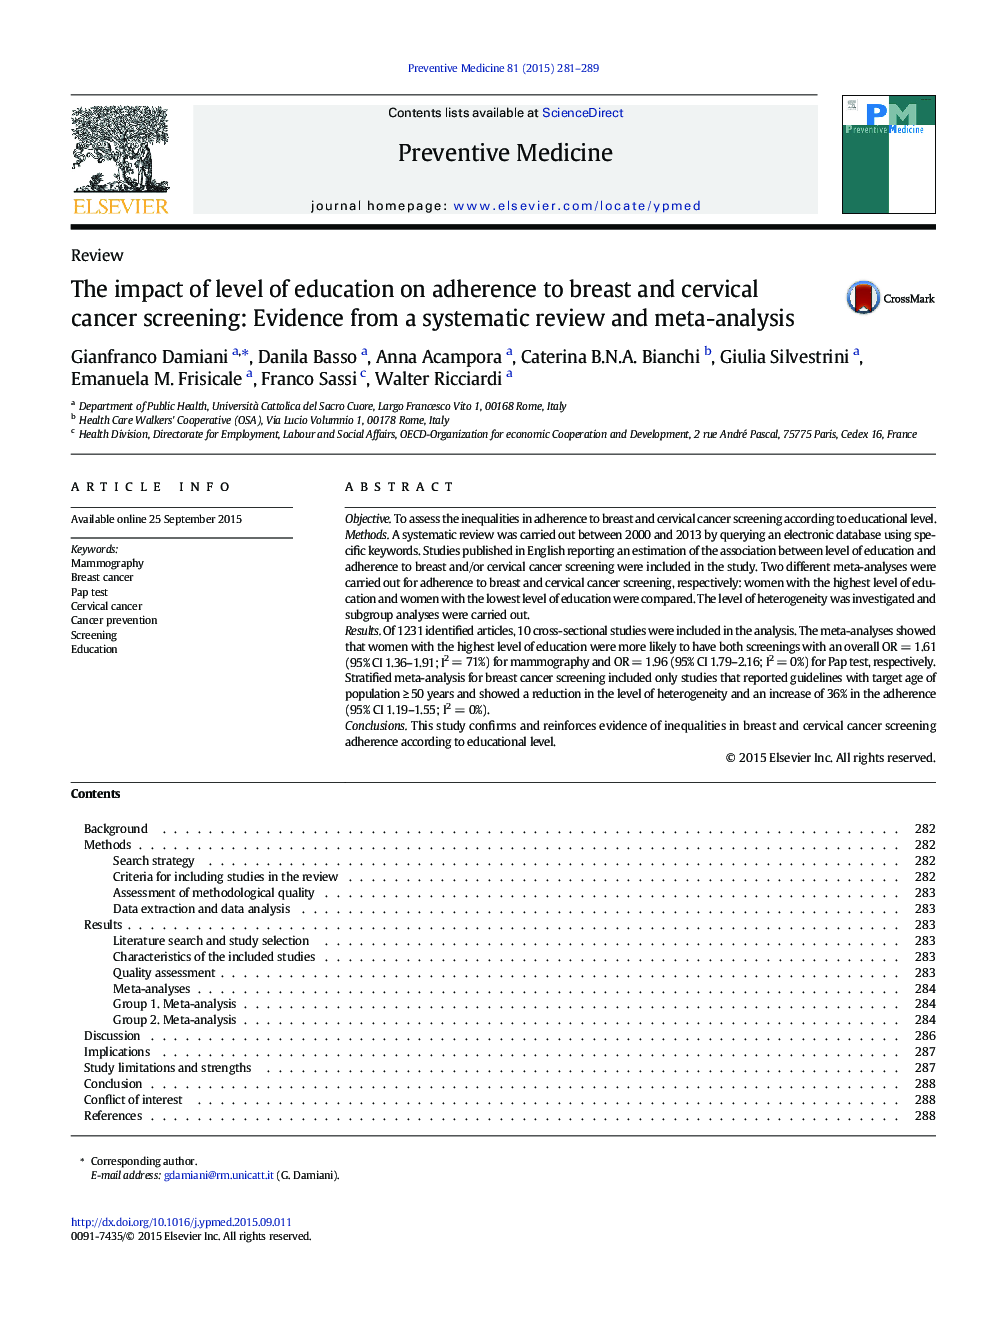 The impact of level of education on adherence to breast and cervical cancer screening: Evidence from a systematic review and meta-analysis